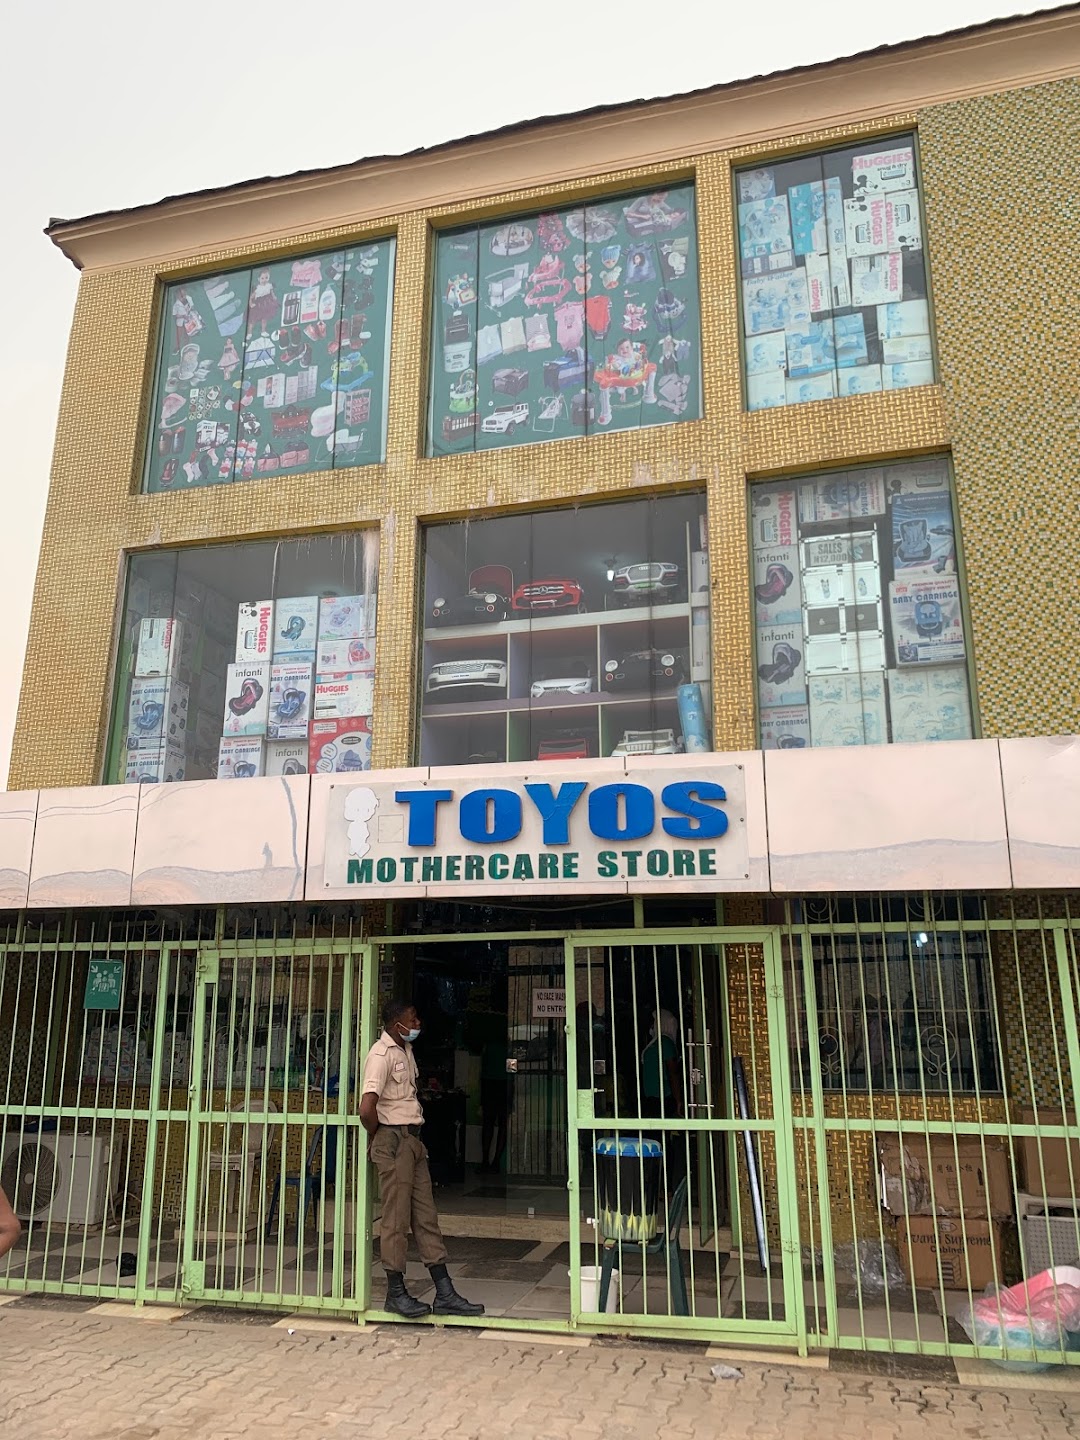 Toyos Mothercare Store